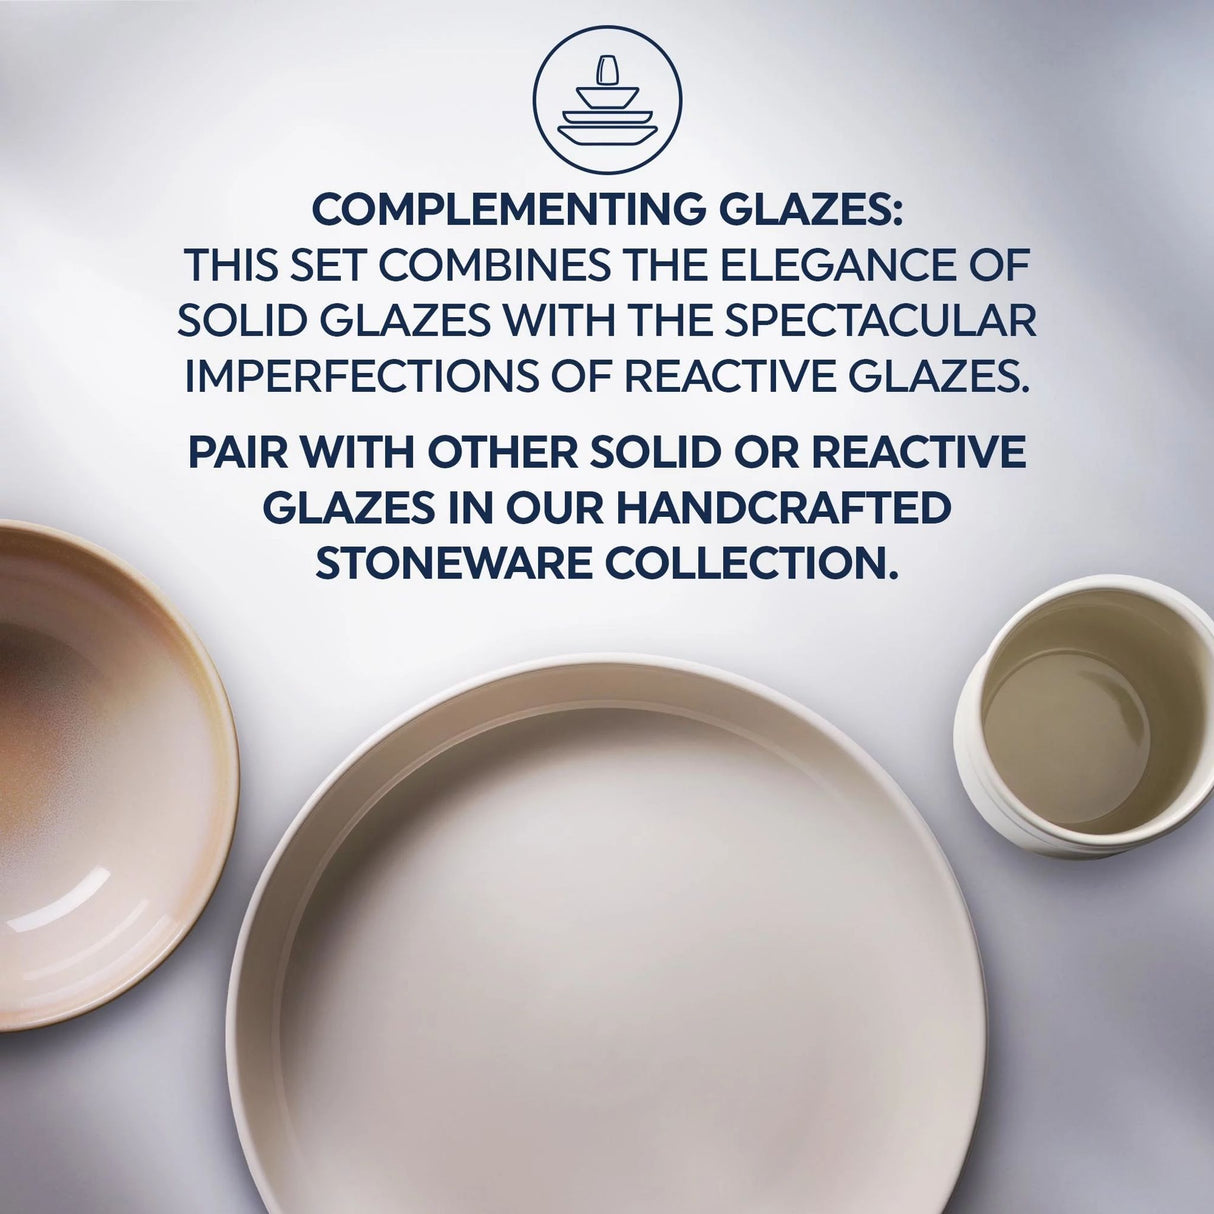  Text that says: Complementing glazes: This set combines the elegance of solid glazes